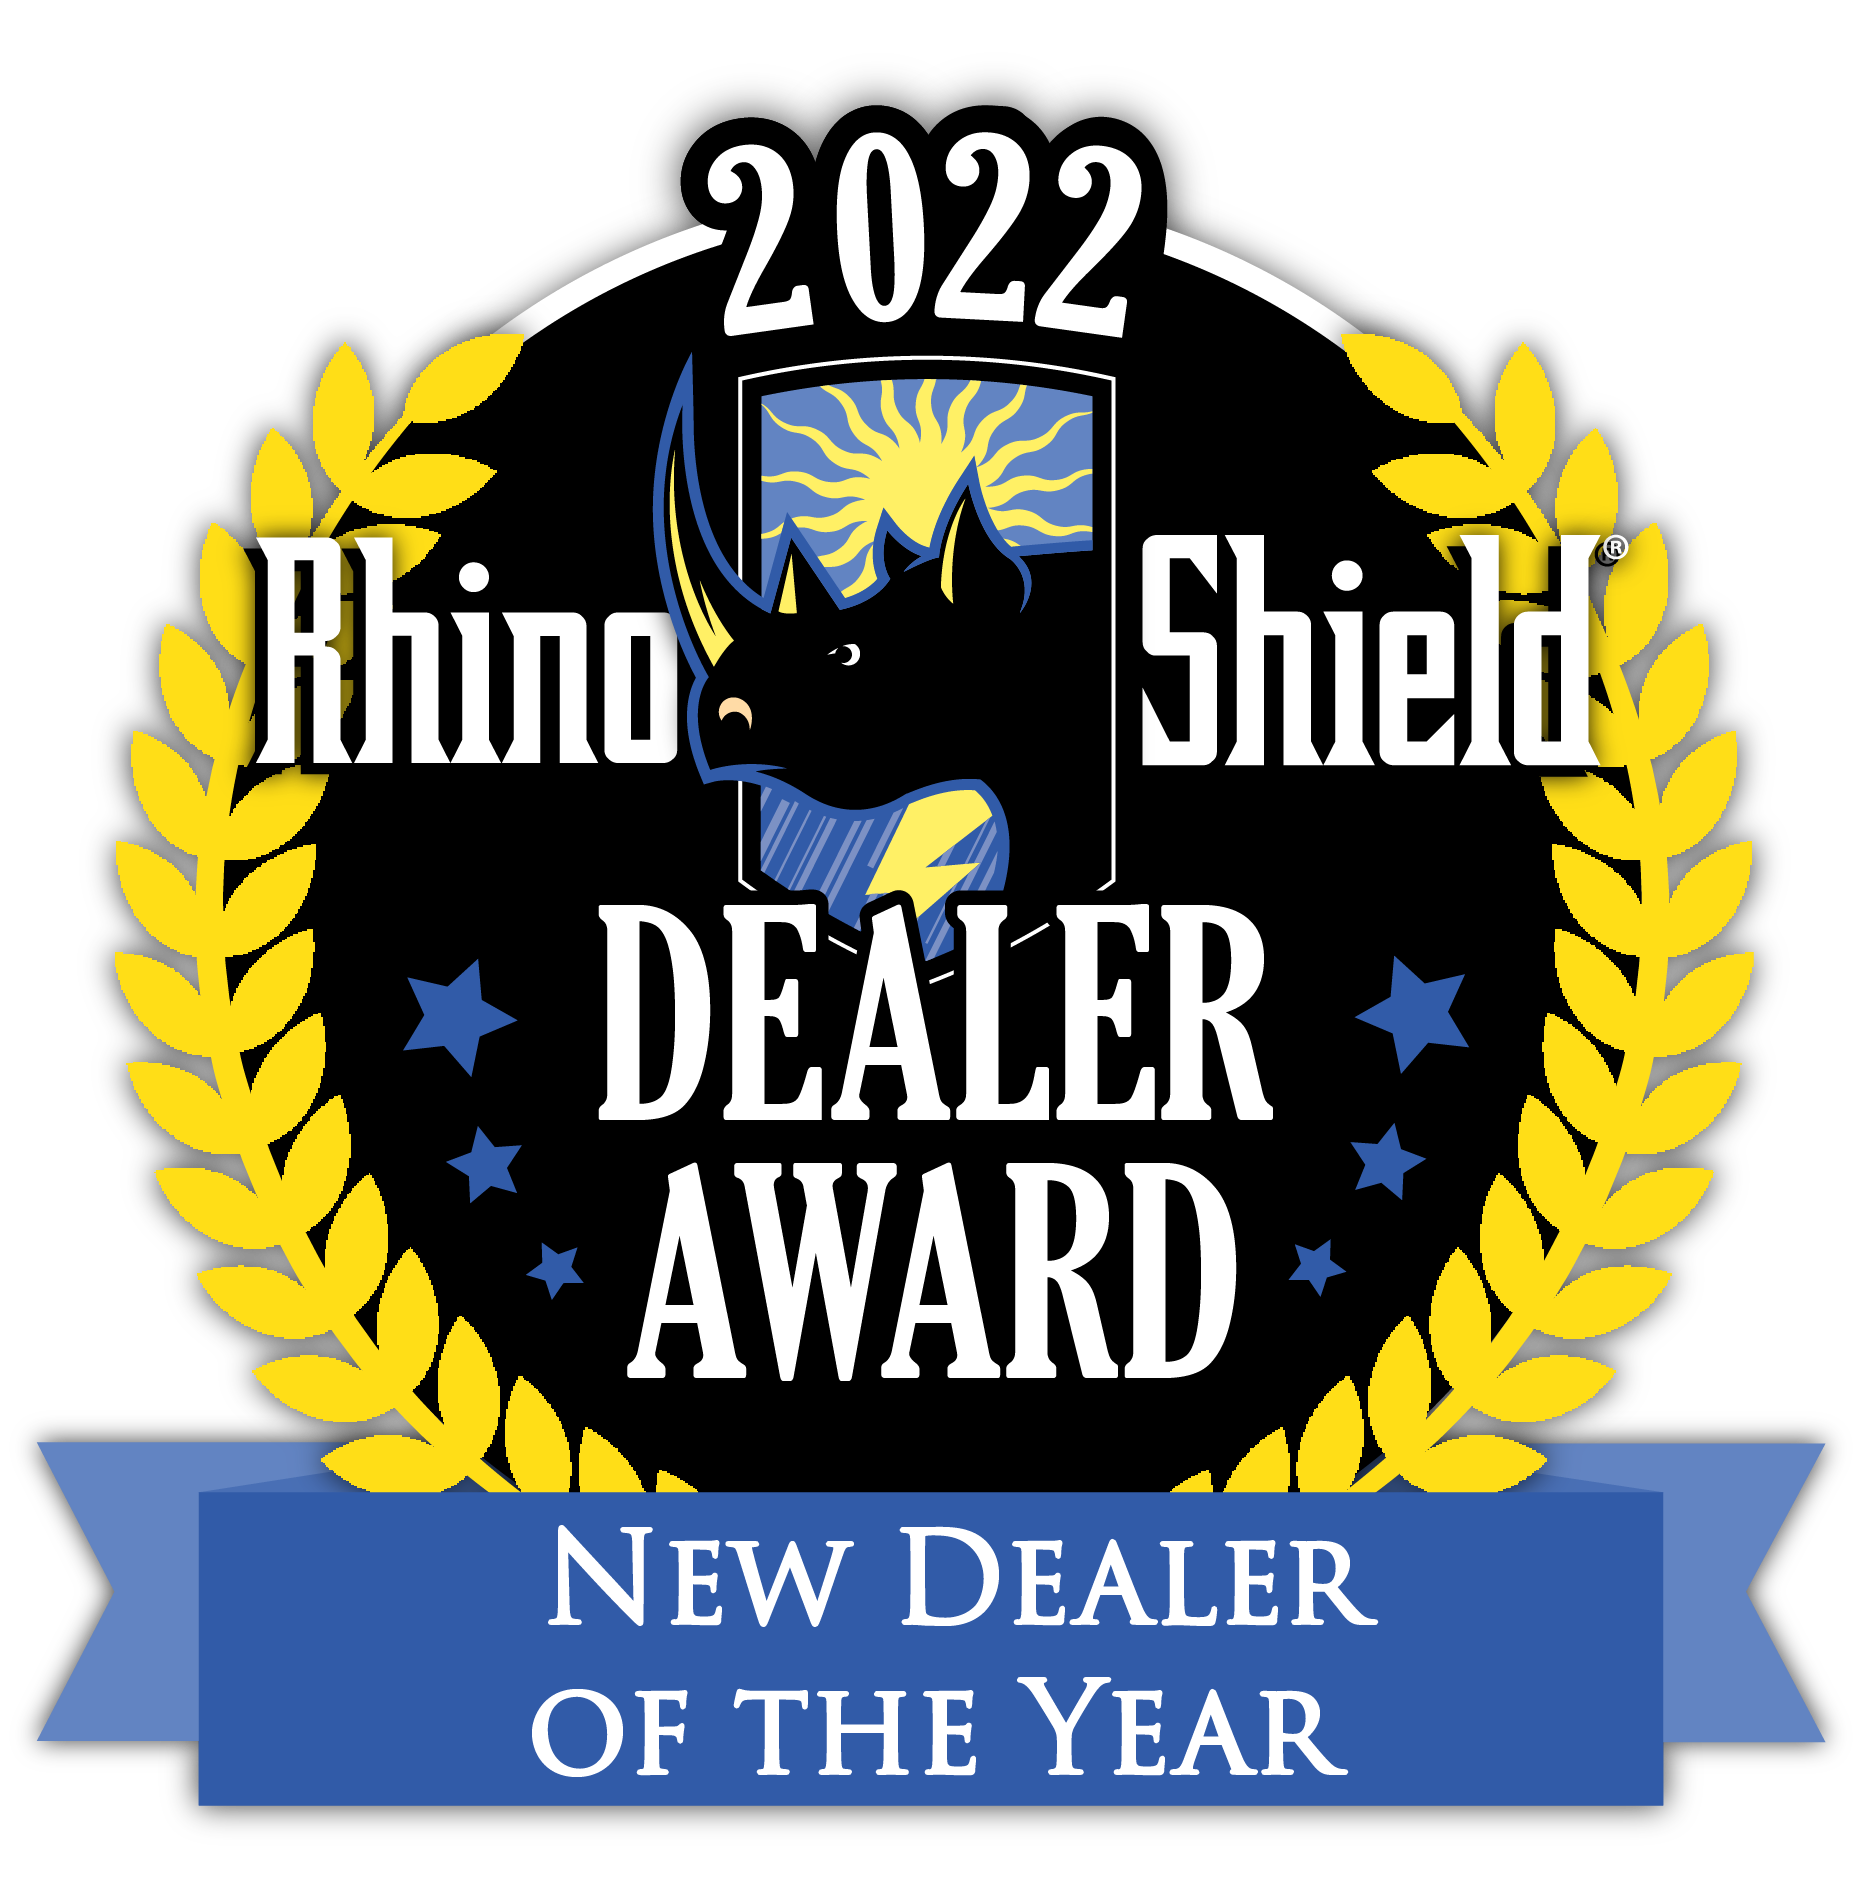 New Dealer of the Year 2022